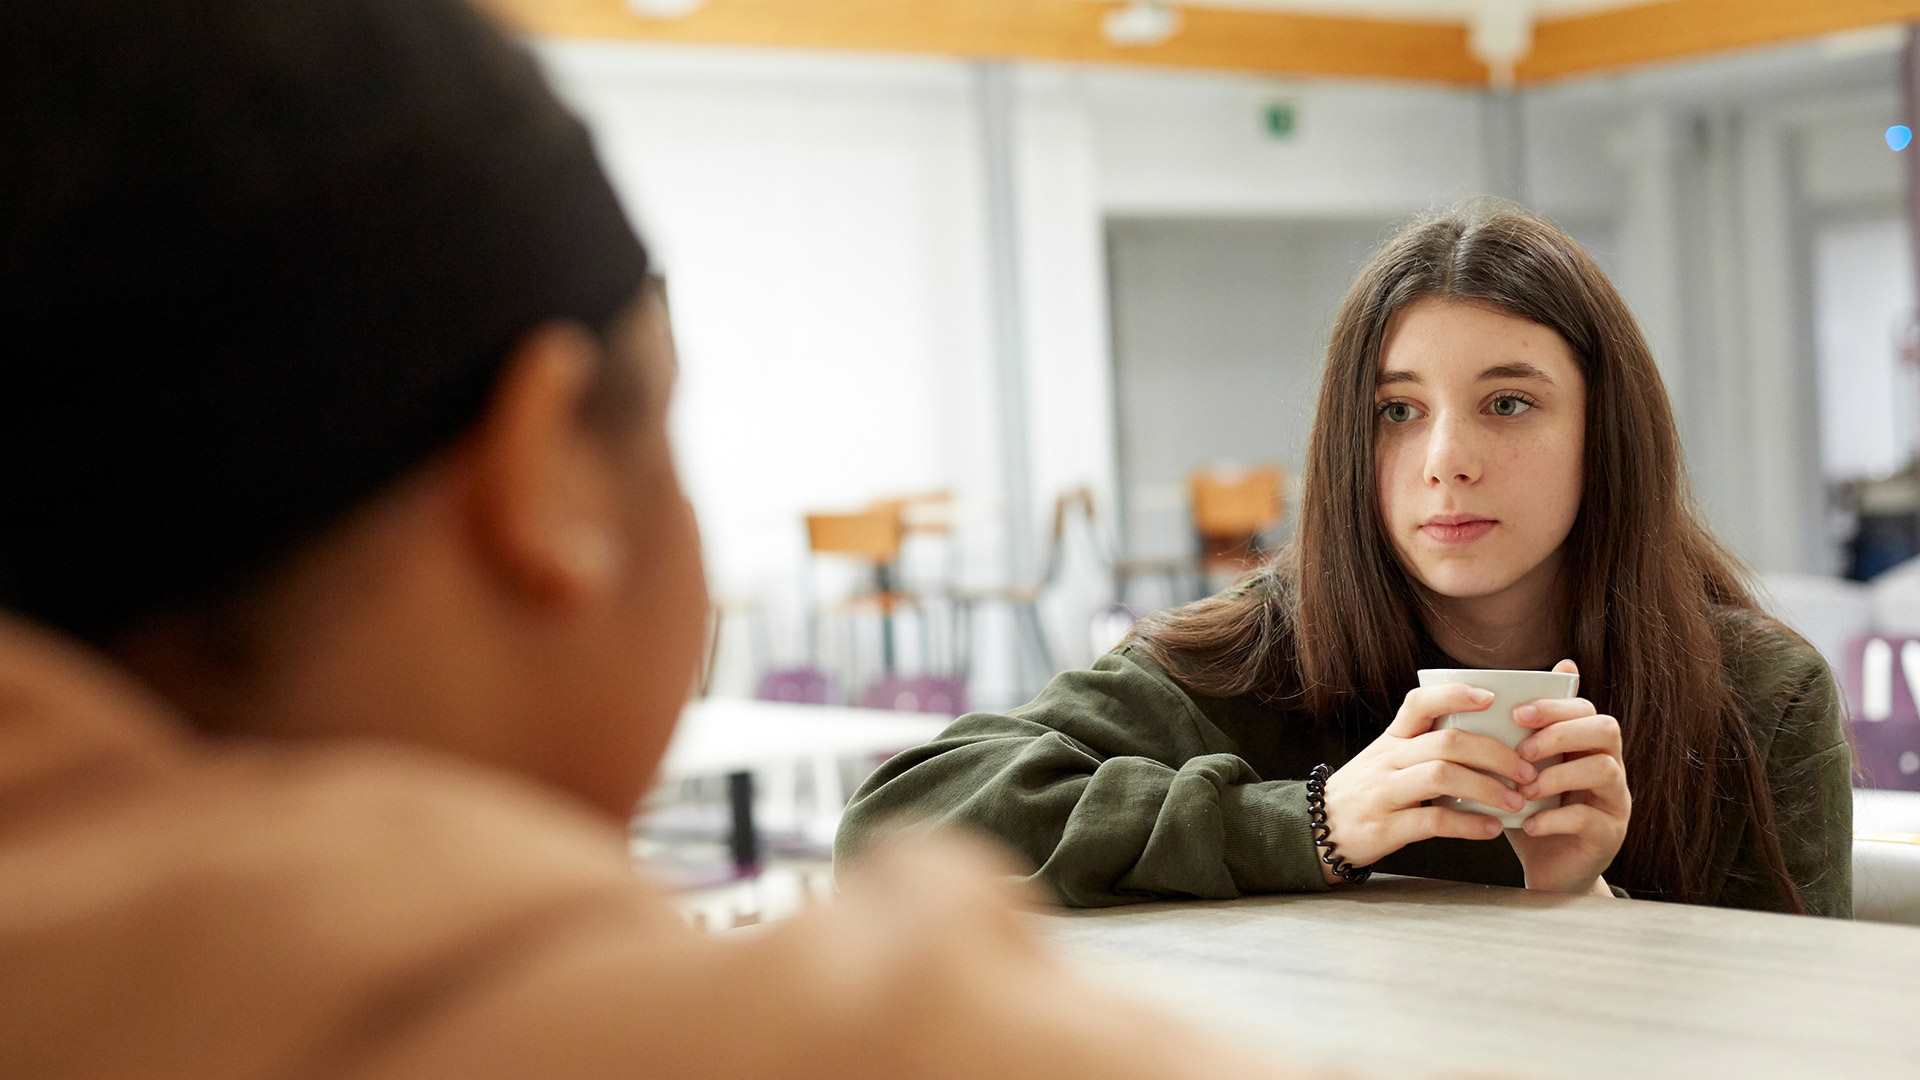 A young girl looks anxious while holding a mug and talking to her friend who is sitting opposite her in a school canteen.